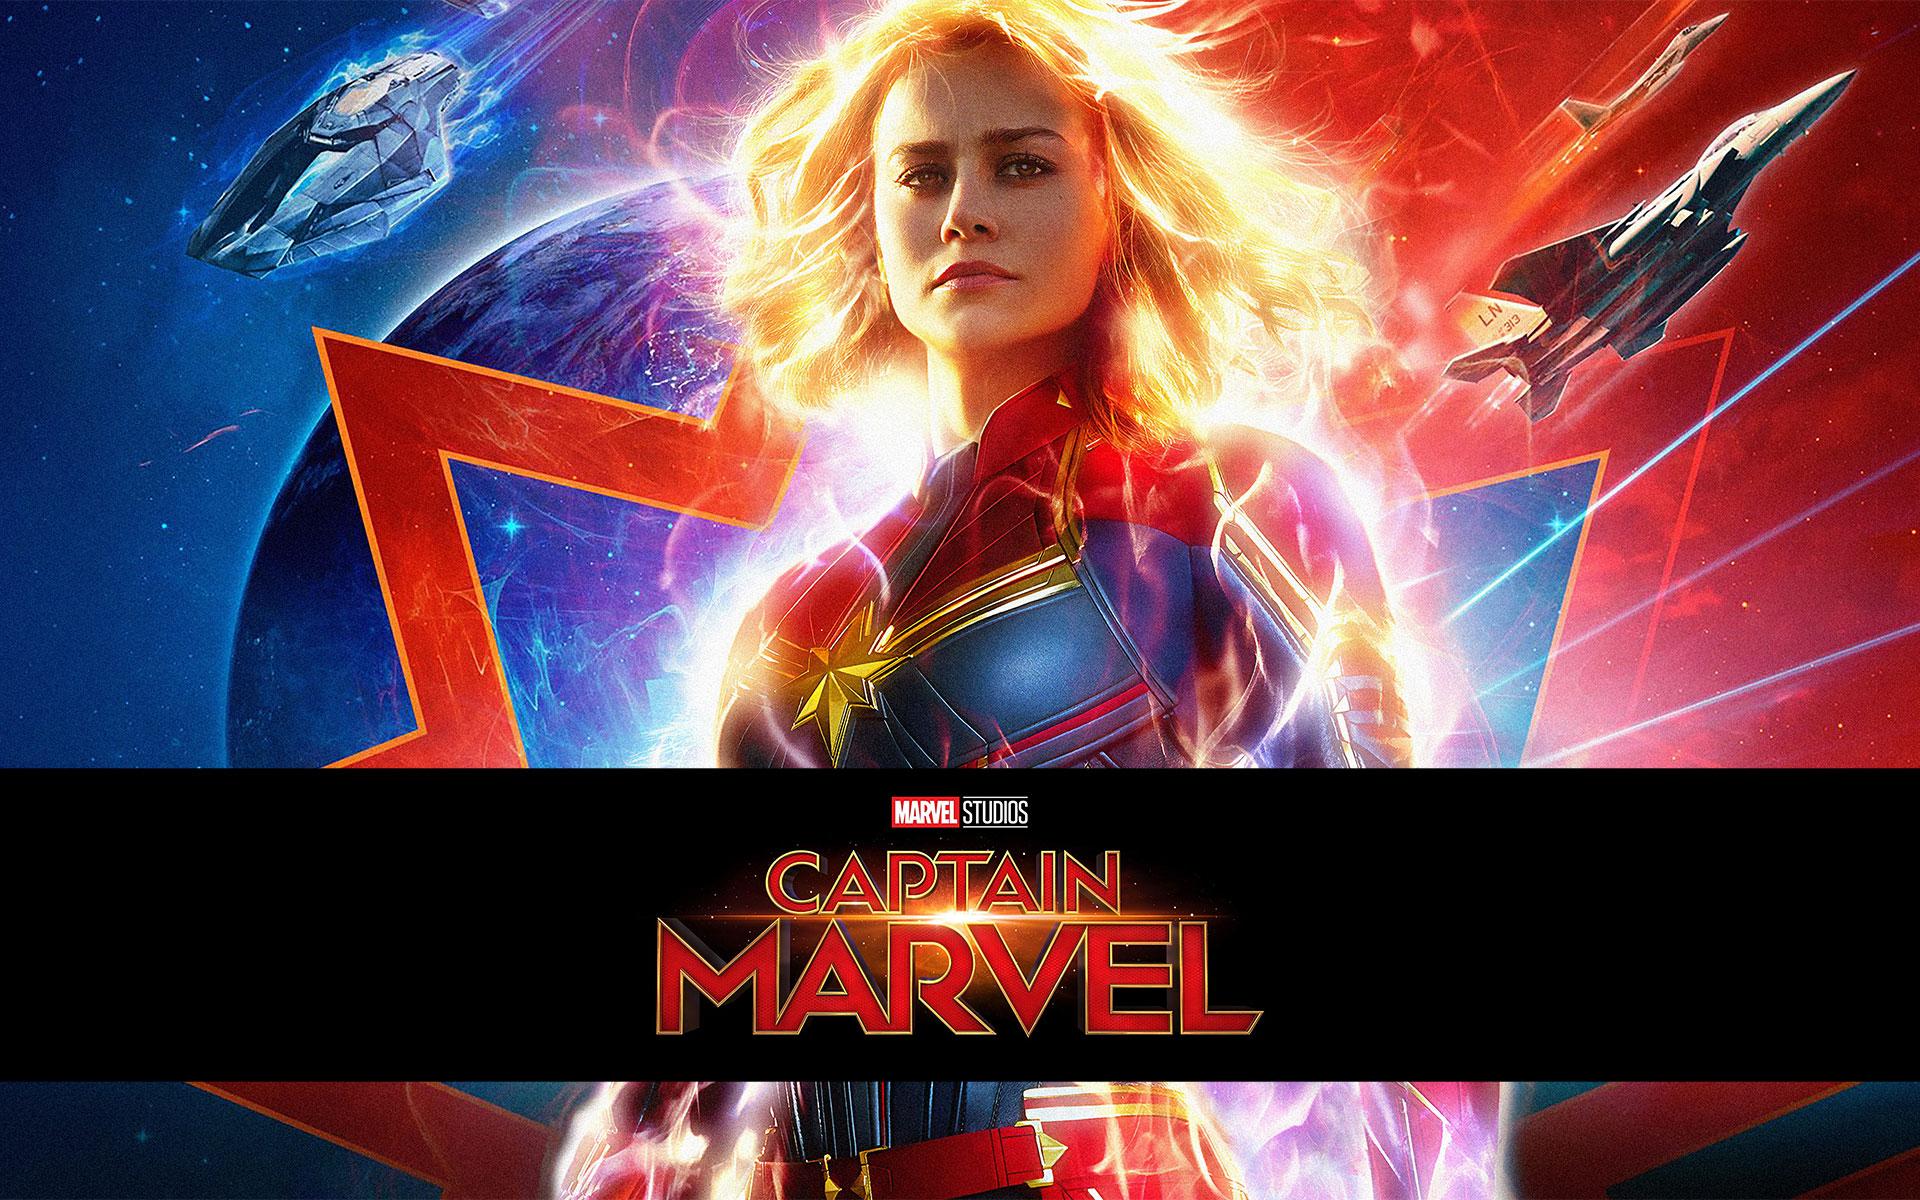 Captain Marvel Movie (2019) Wallpaper HD, Cast, Release Date, Powers & Posters